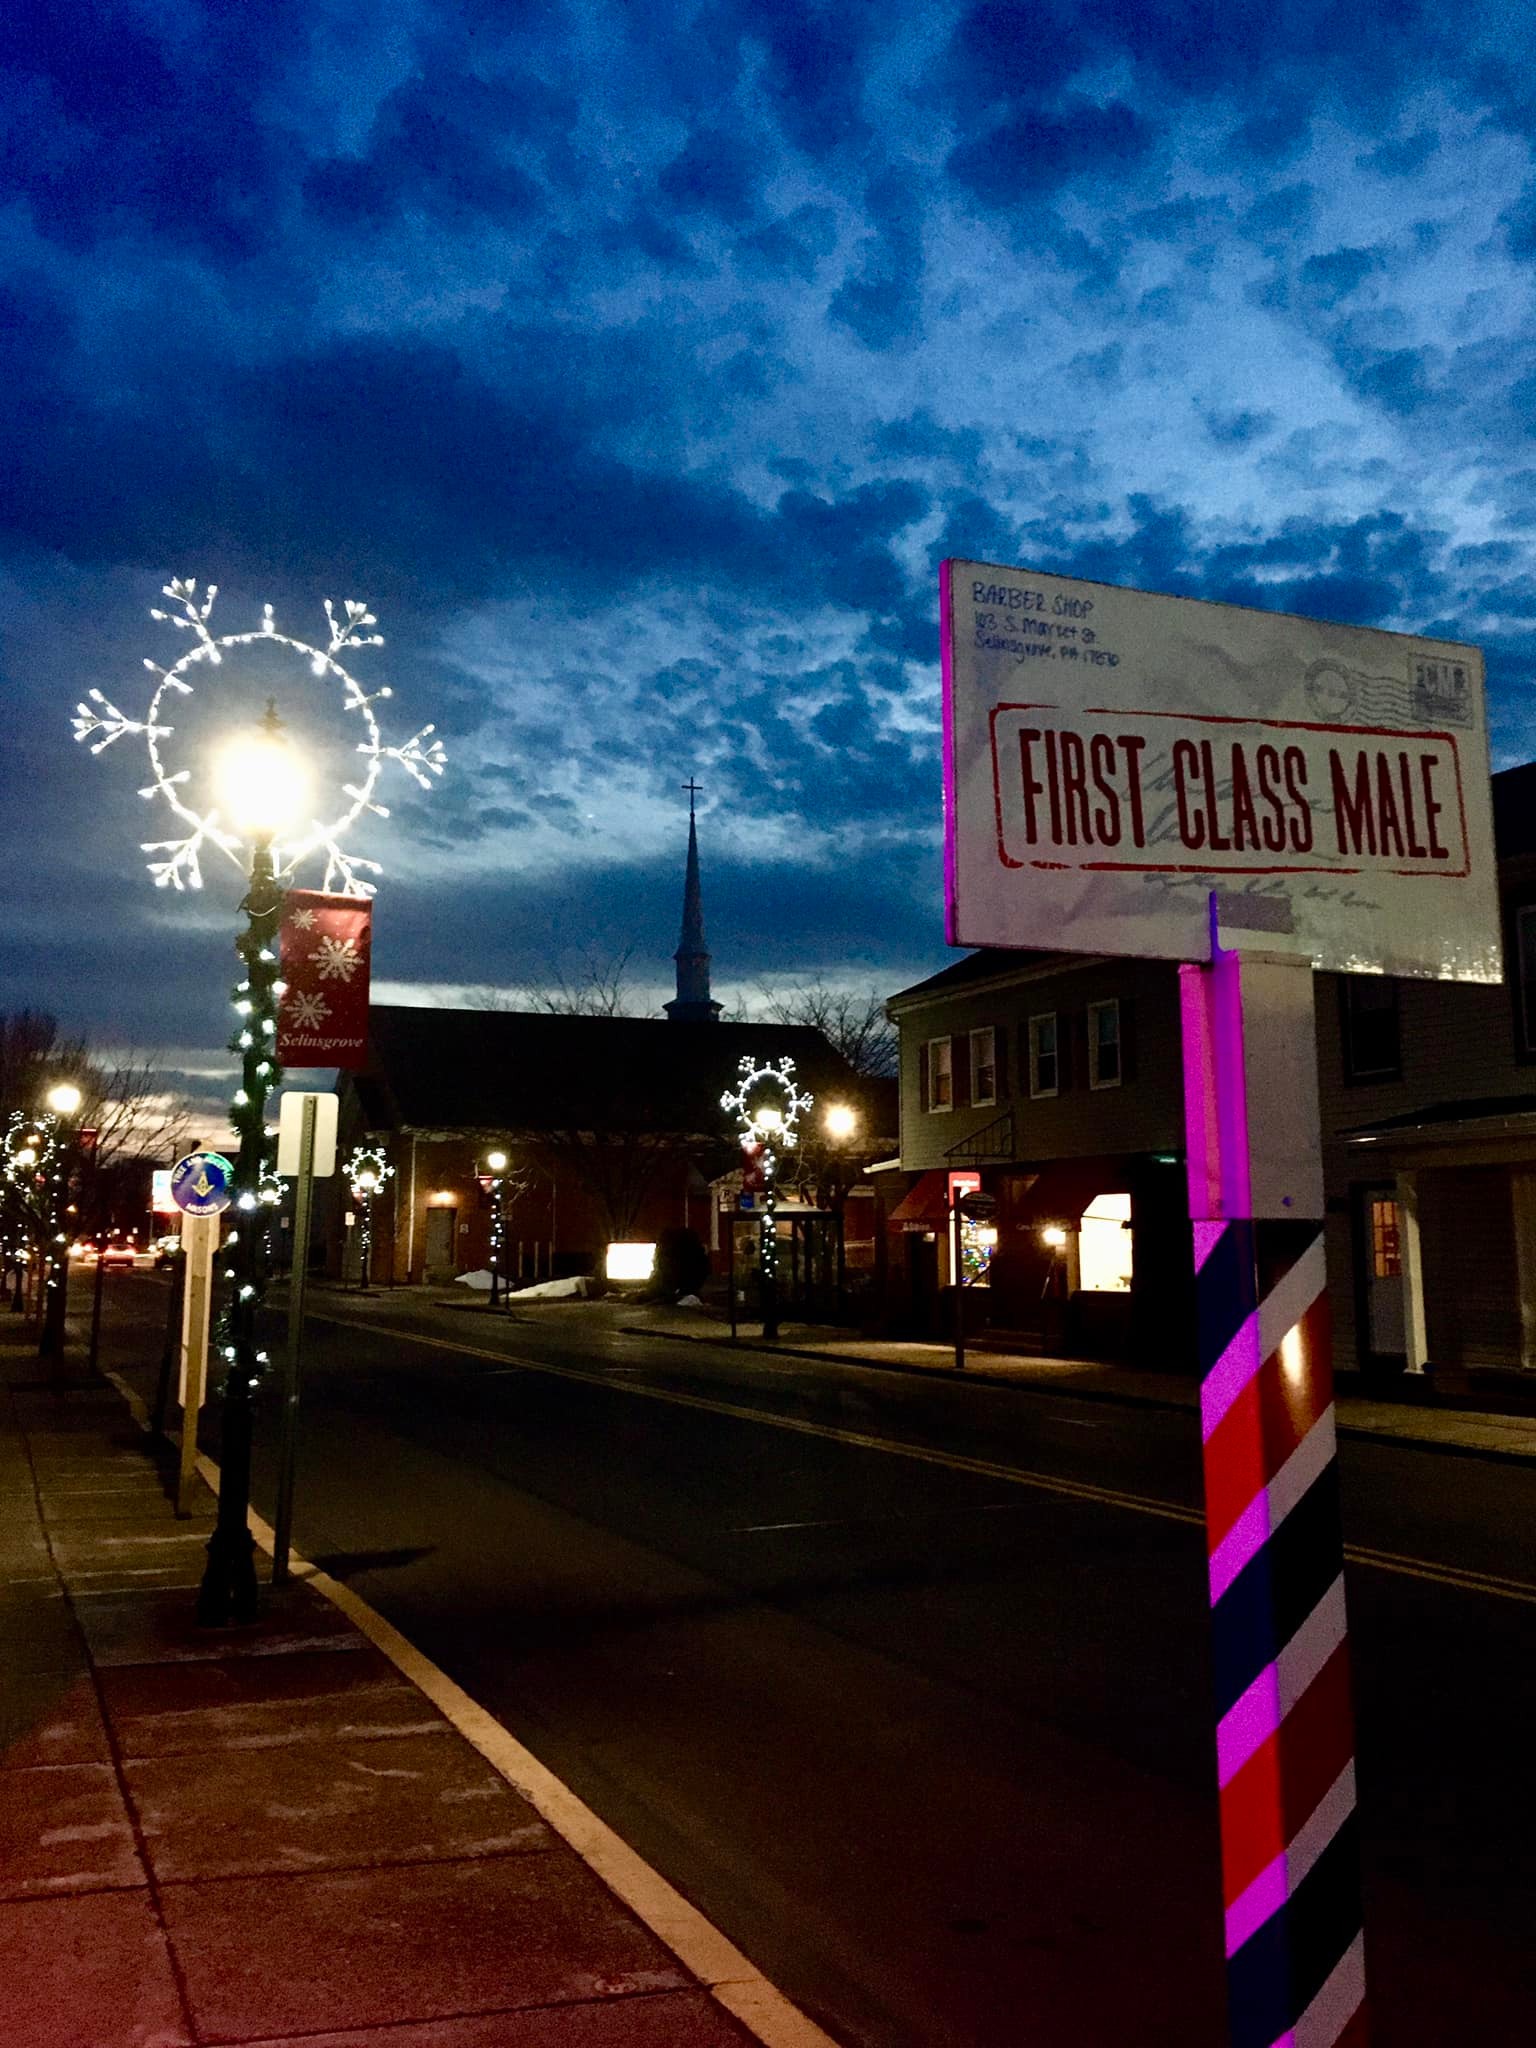 First Class Male 103 S Market St, Selinsgrove Pennsylvania 17870